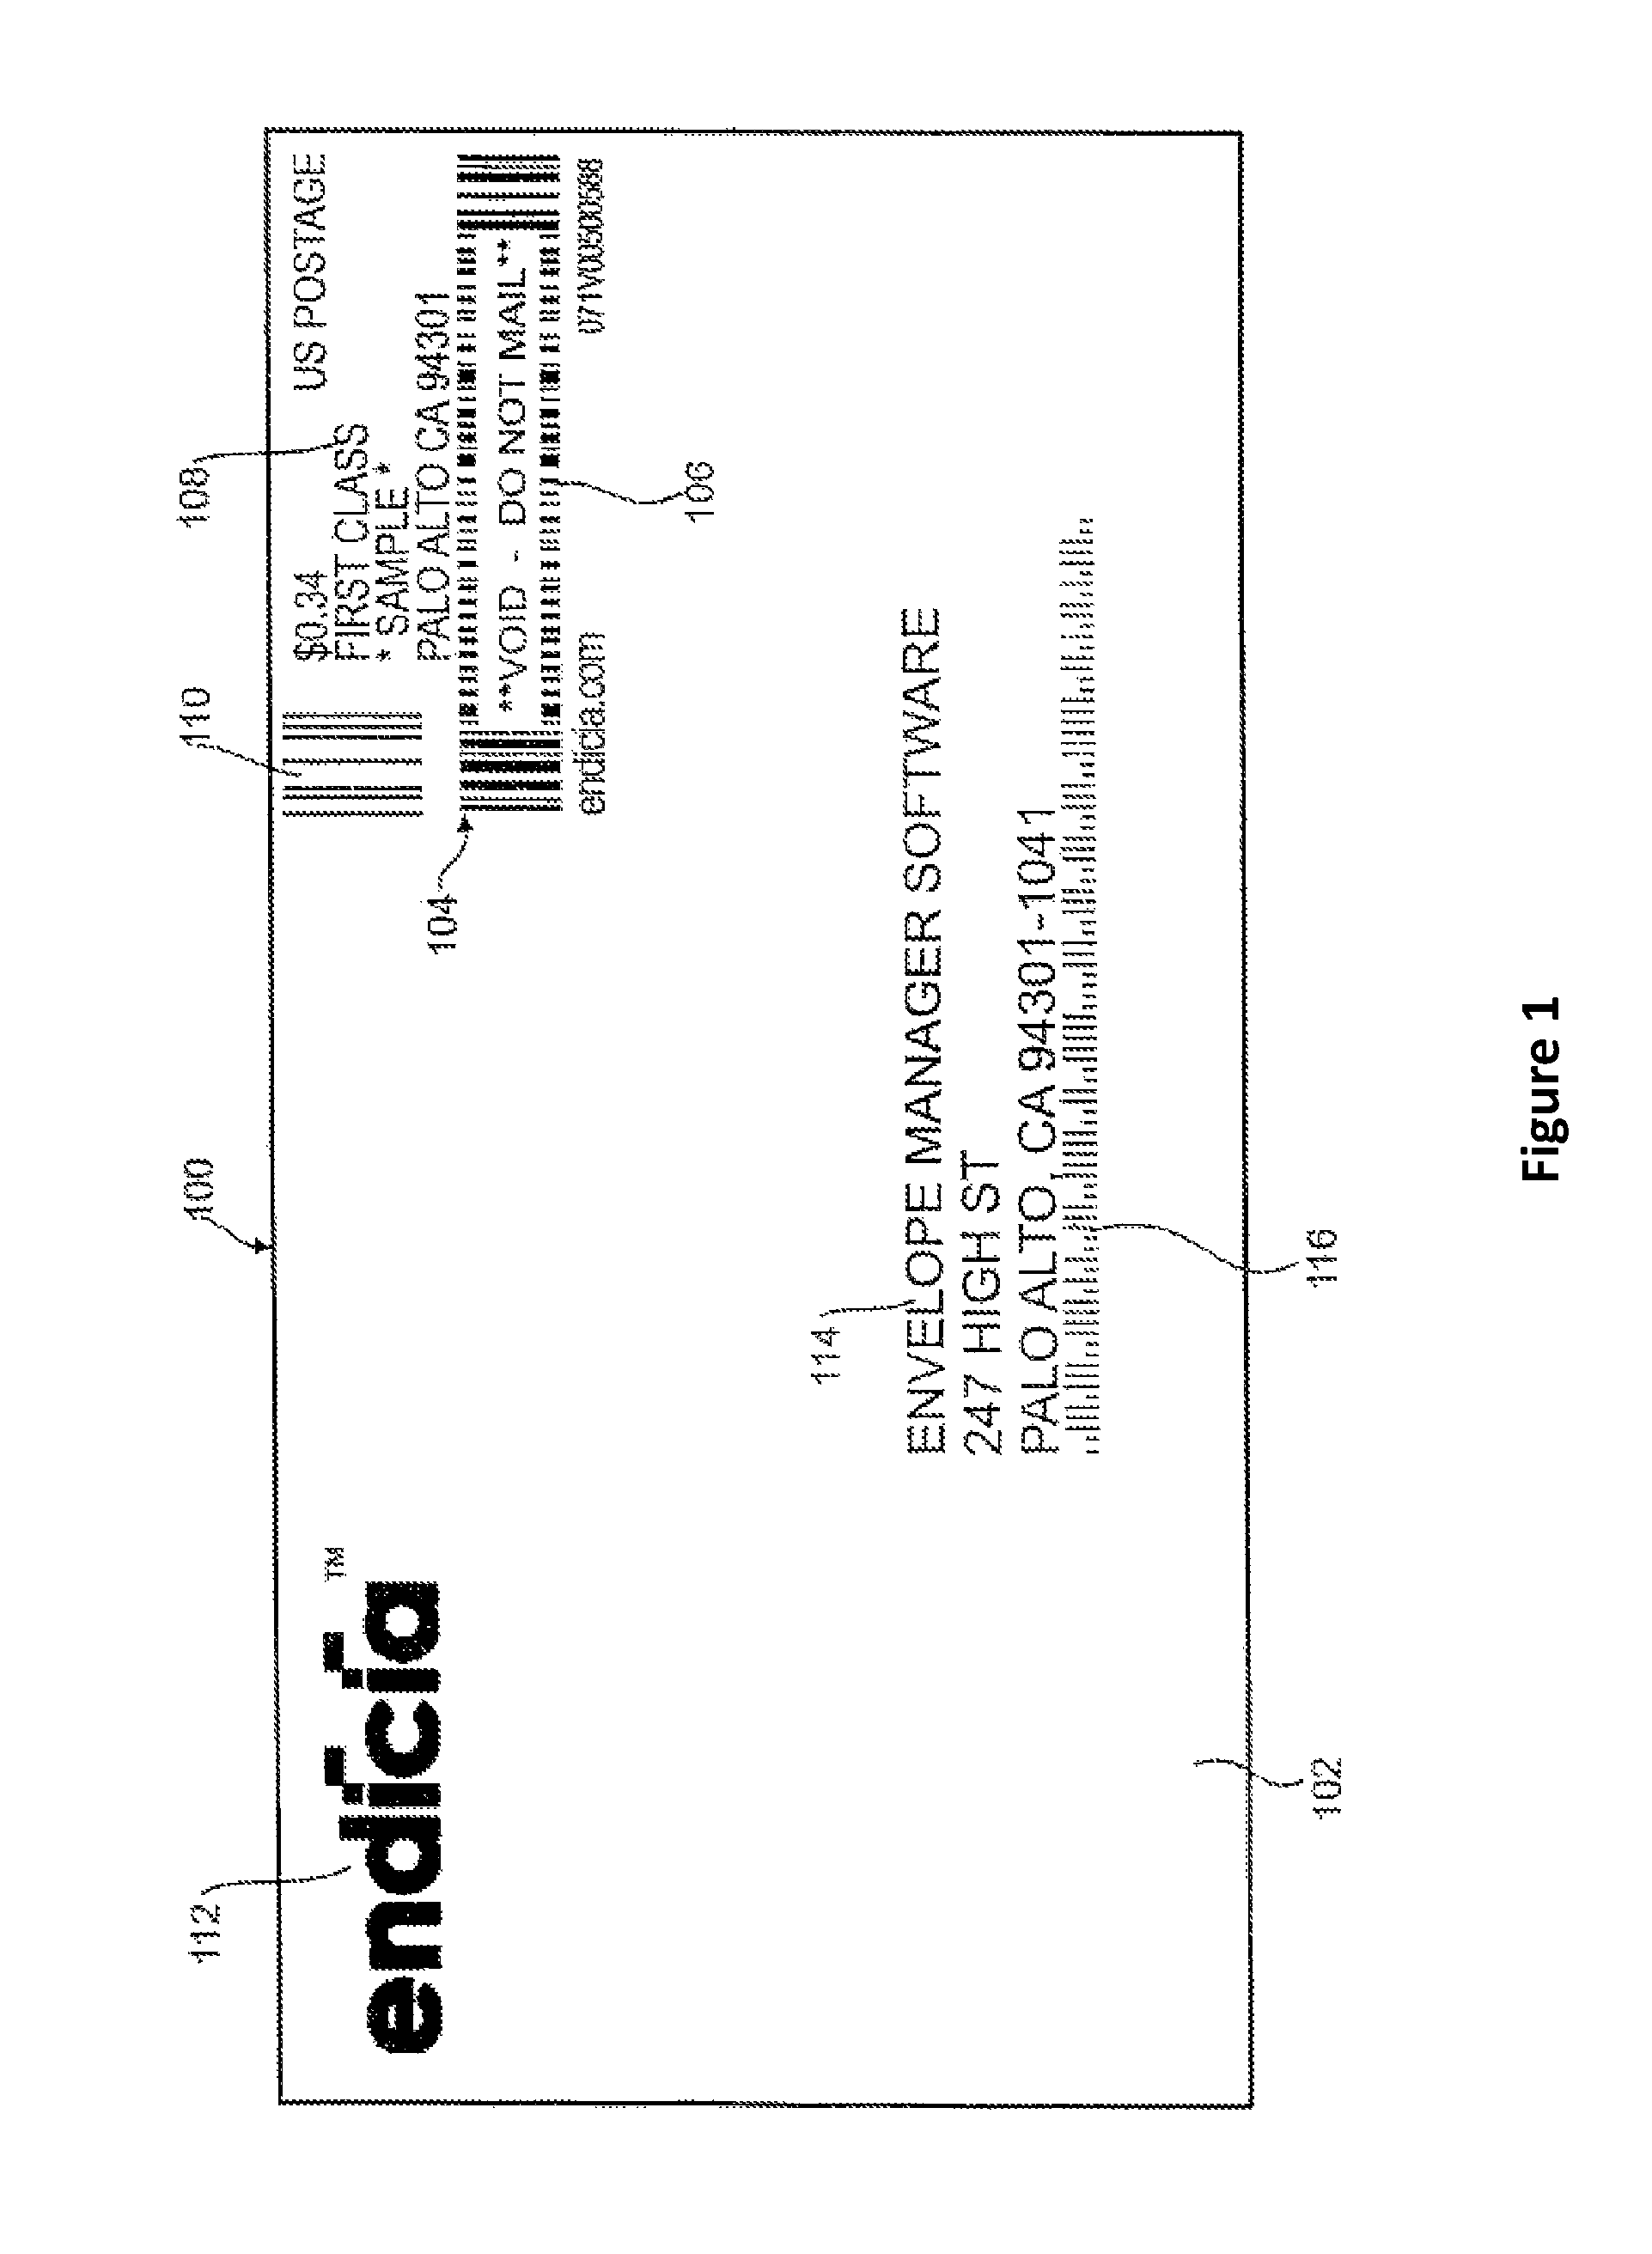 System and method for securely disseminating and managing postal rates